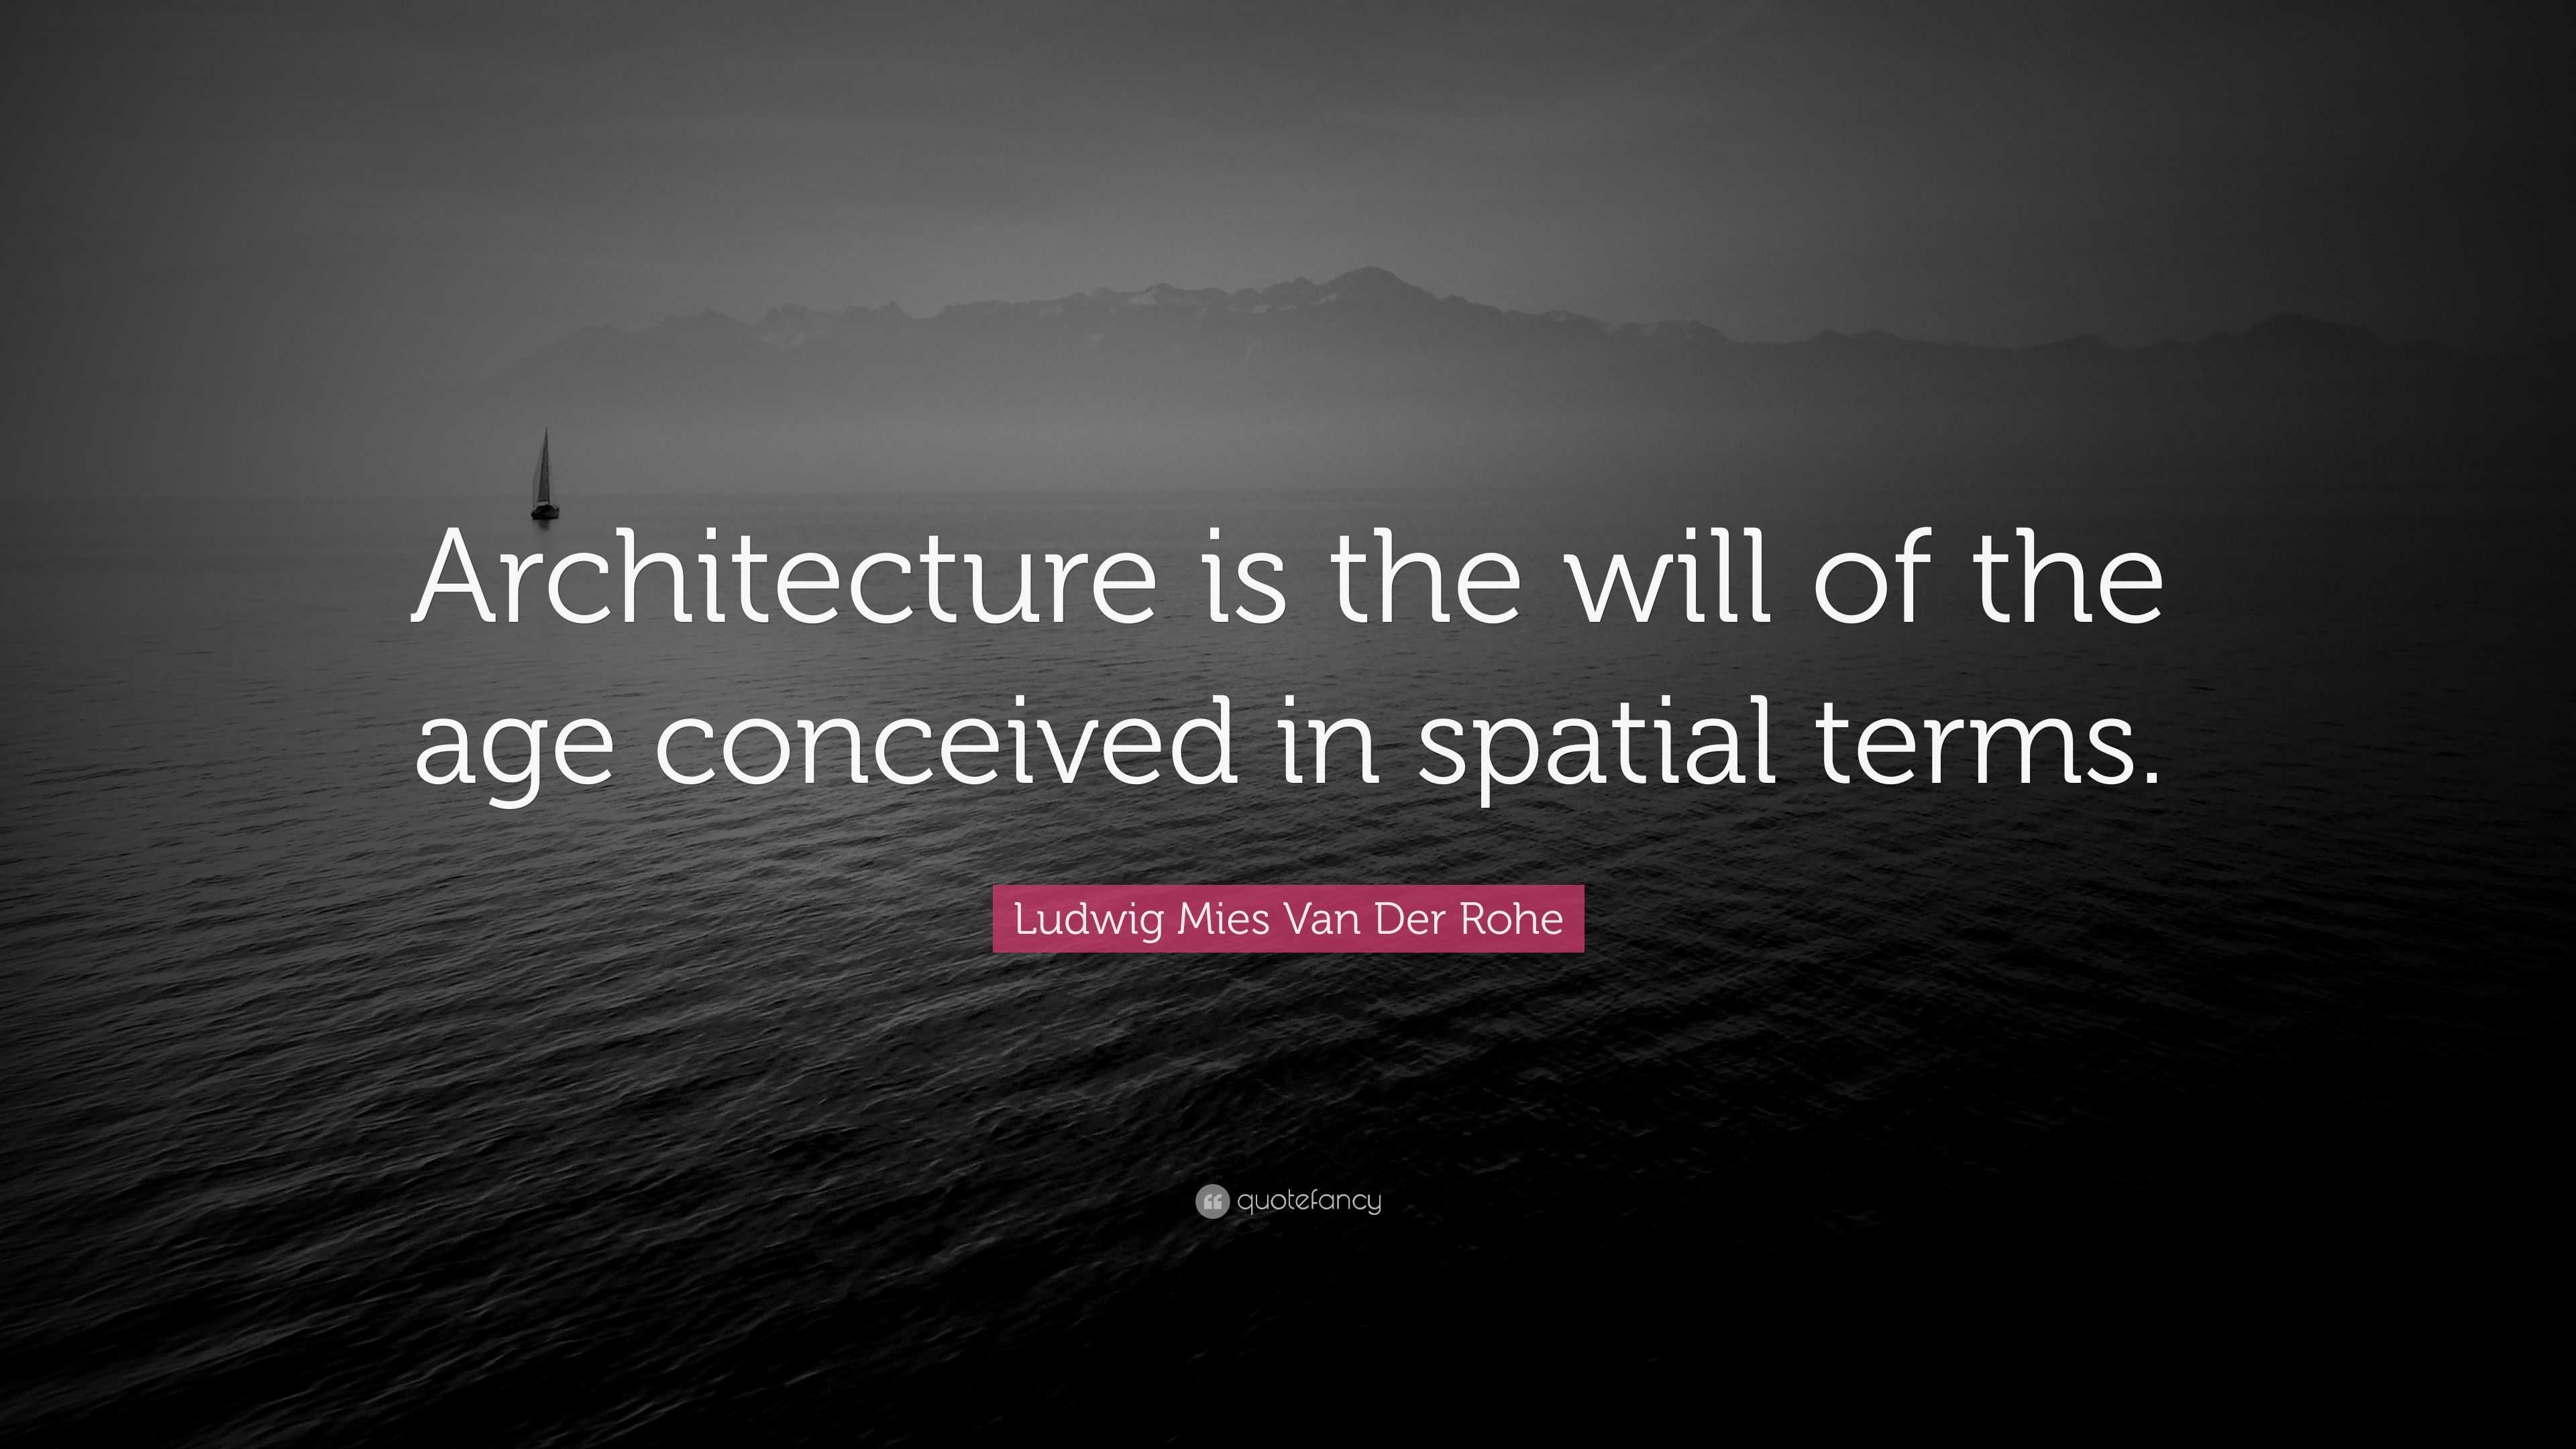 Ludwig Mies Van Der Rohe Quote: “Architecture is the will of the age ...